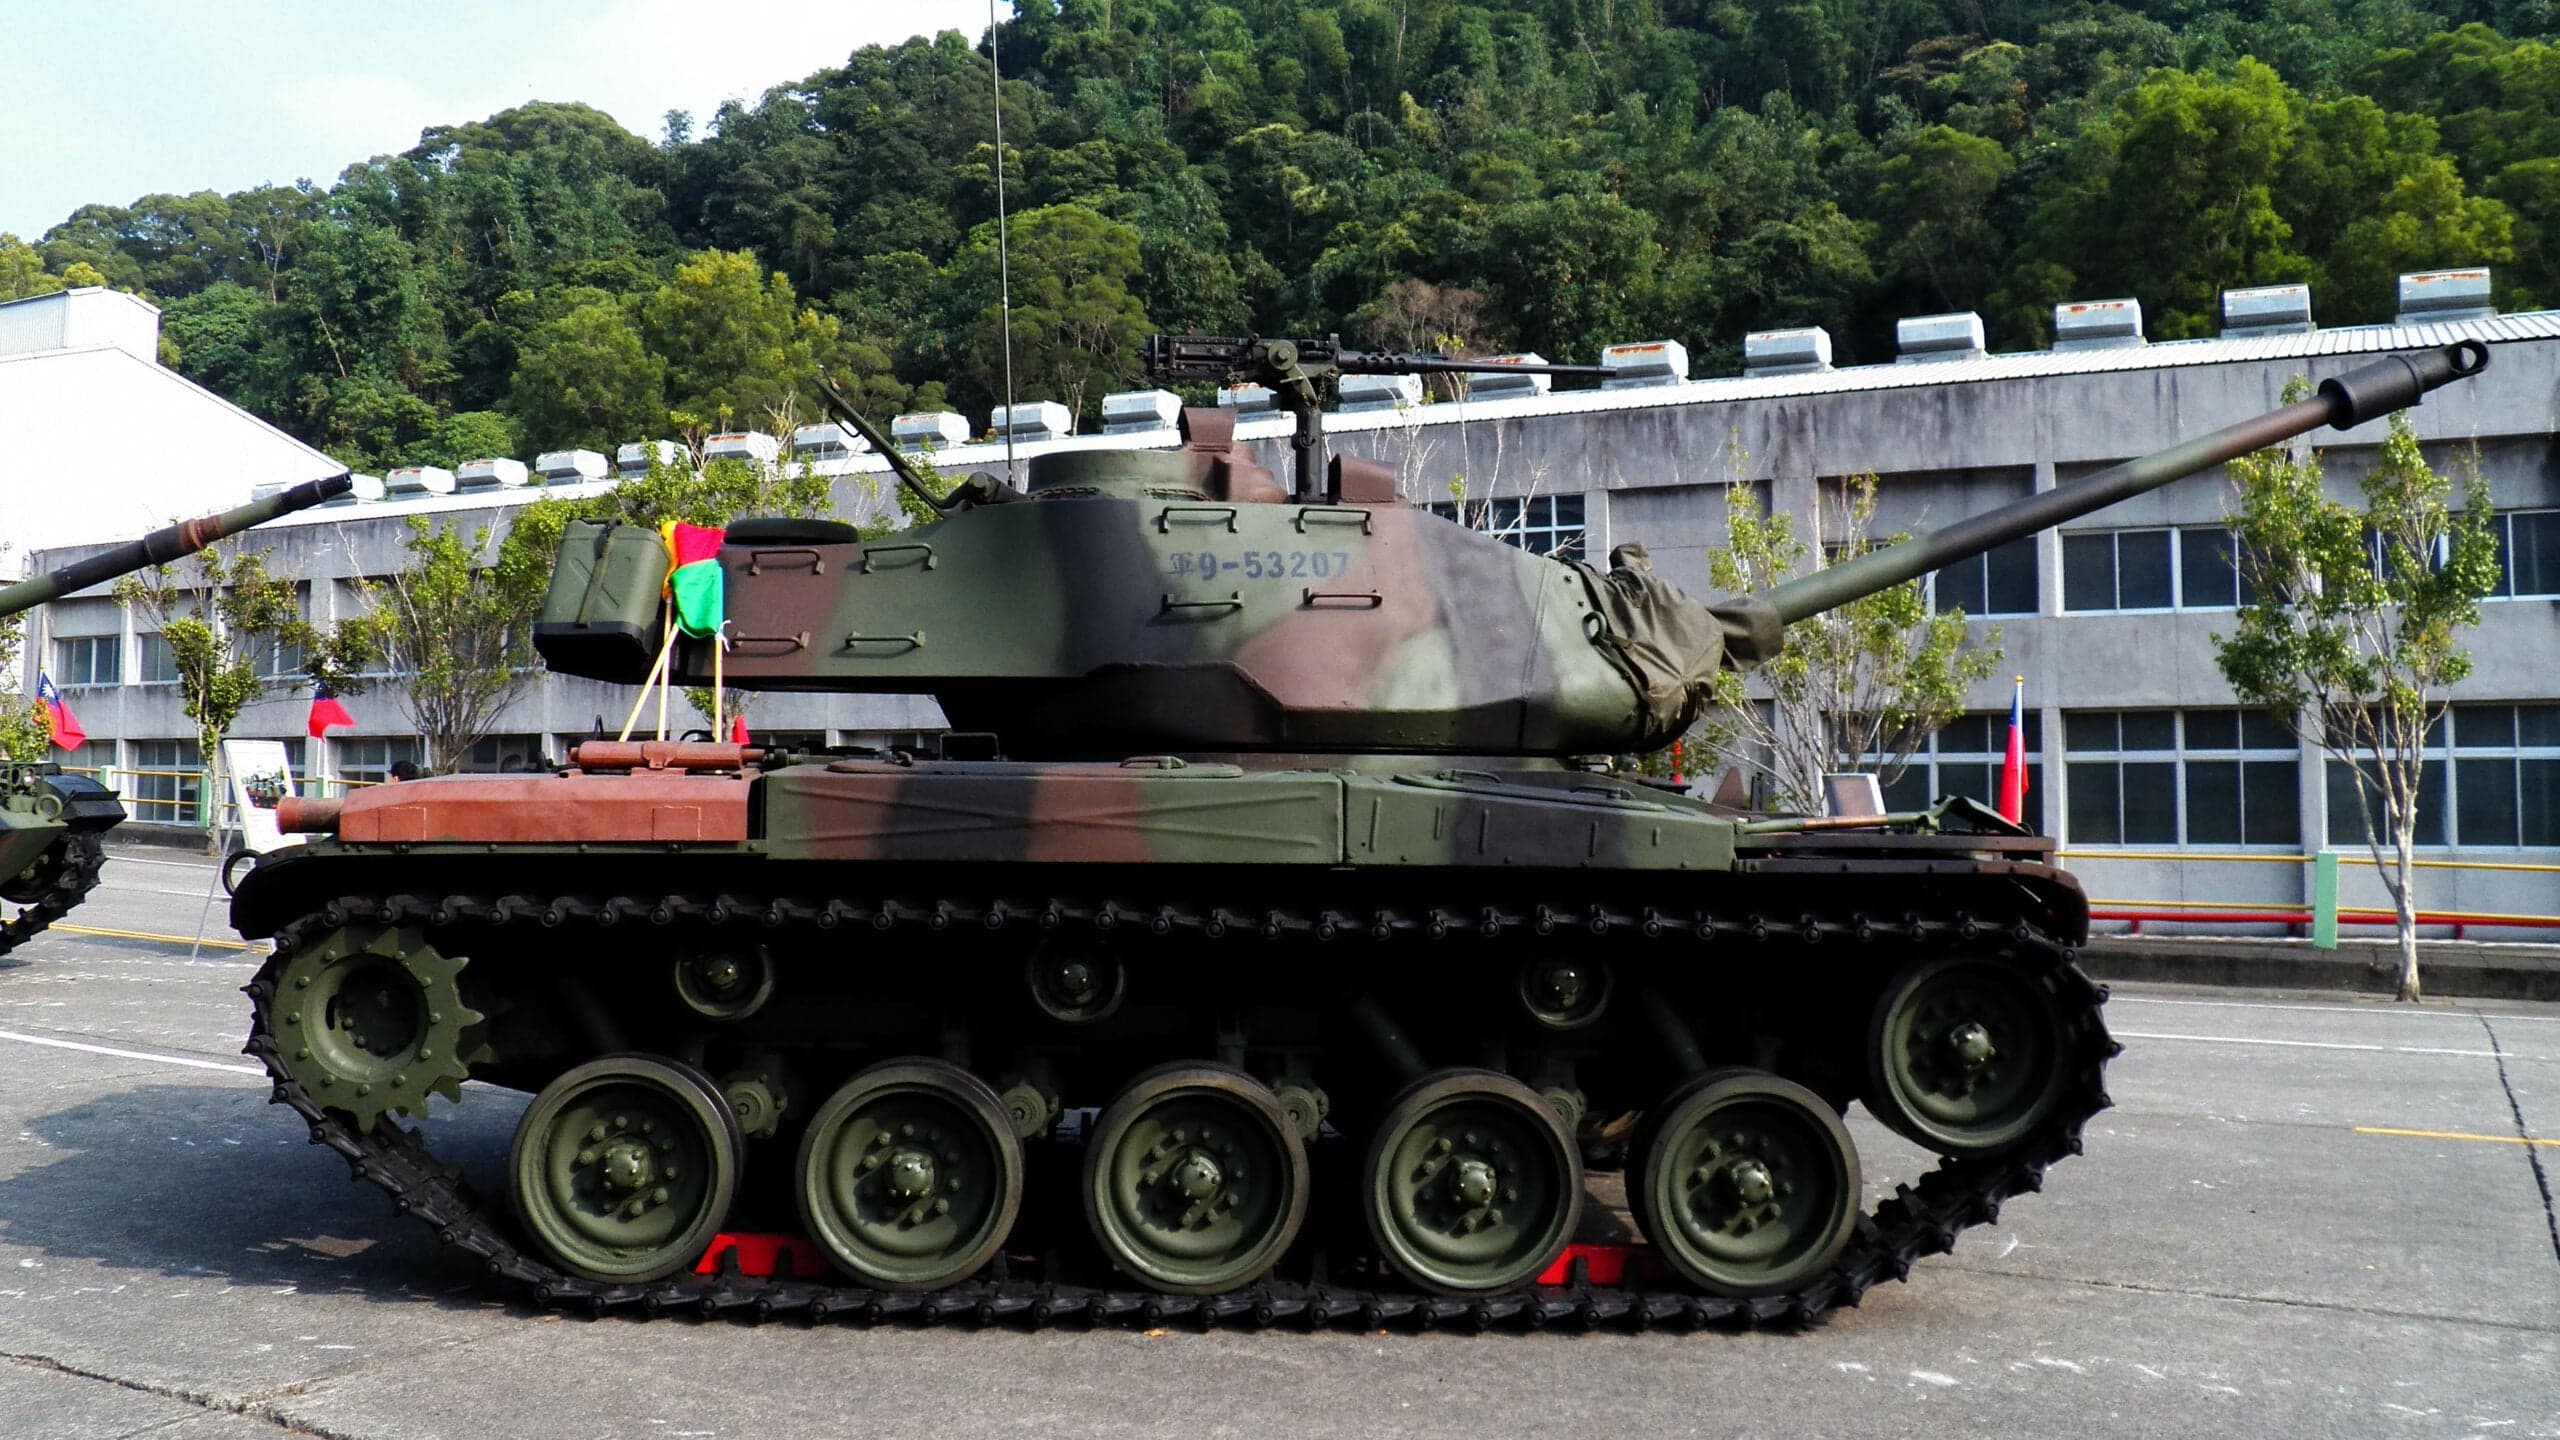 Taiwan Is Giving Up Its M41A3 Walker Bulldog Tanks After More Than Six Decades Of Service